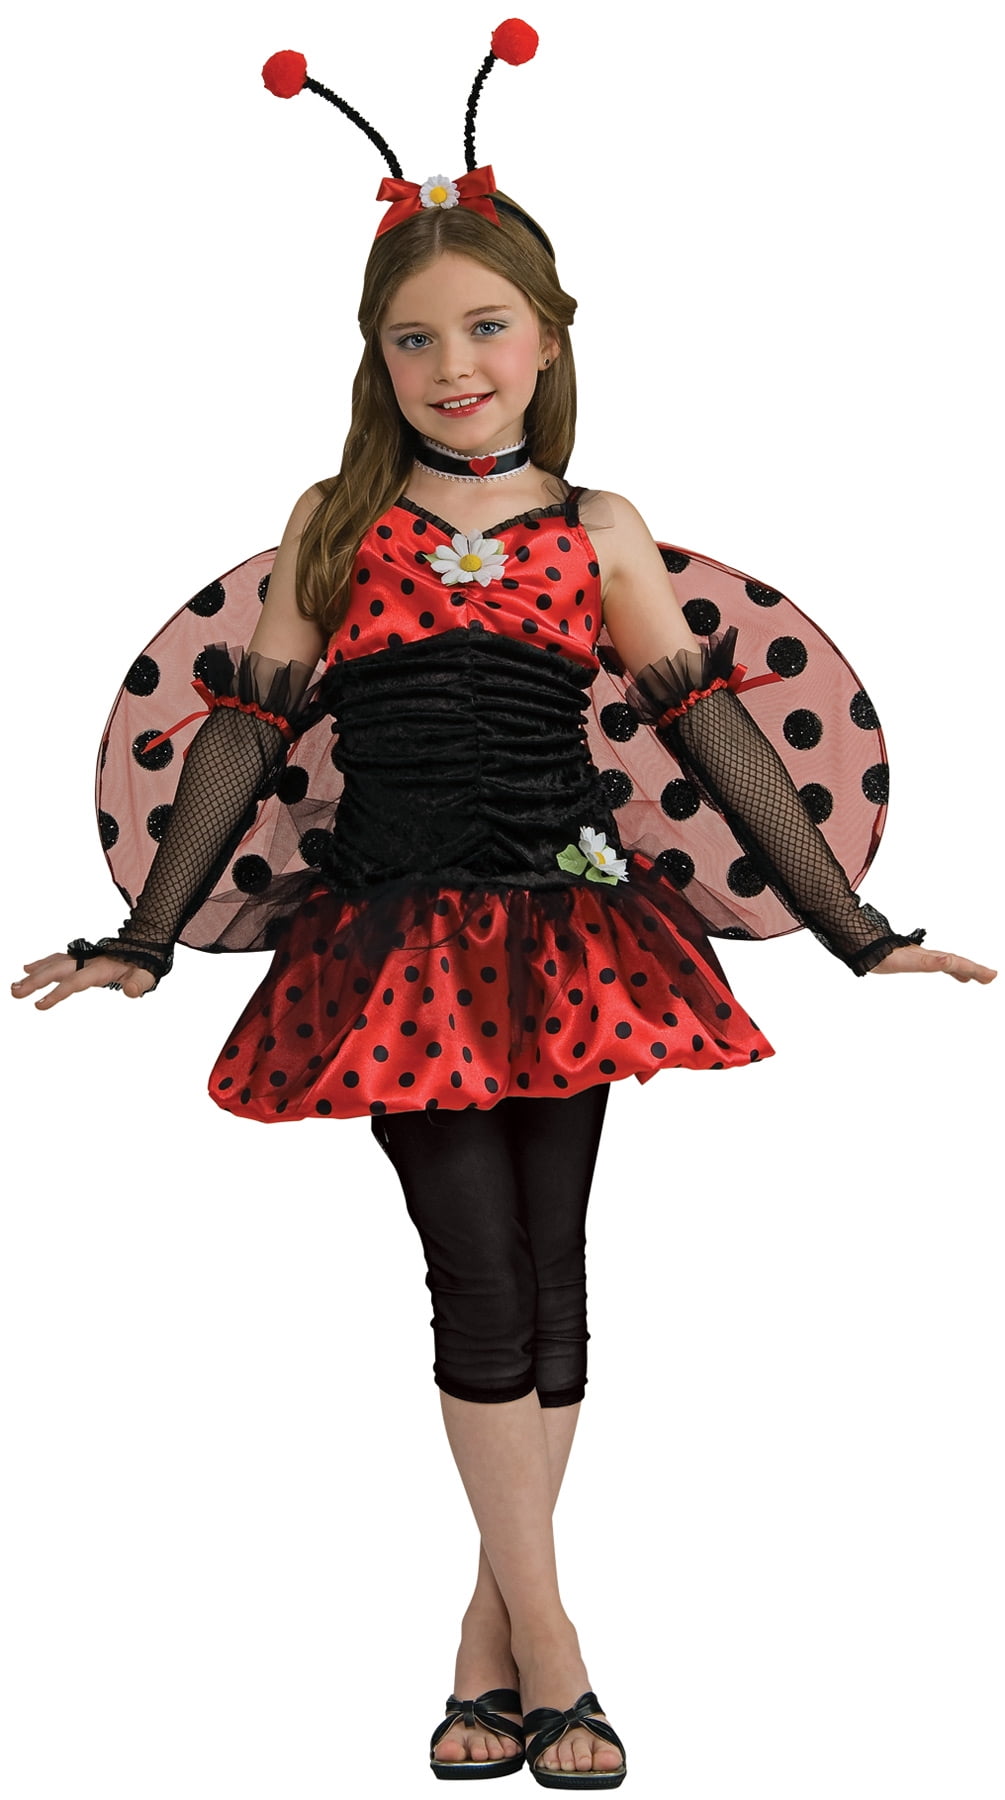 Details about   NWT Toddler Girls Ladybug Disguise Halloween Costume 2T 